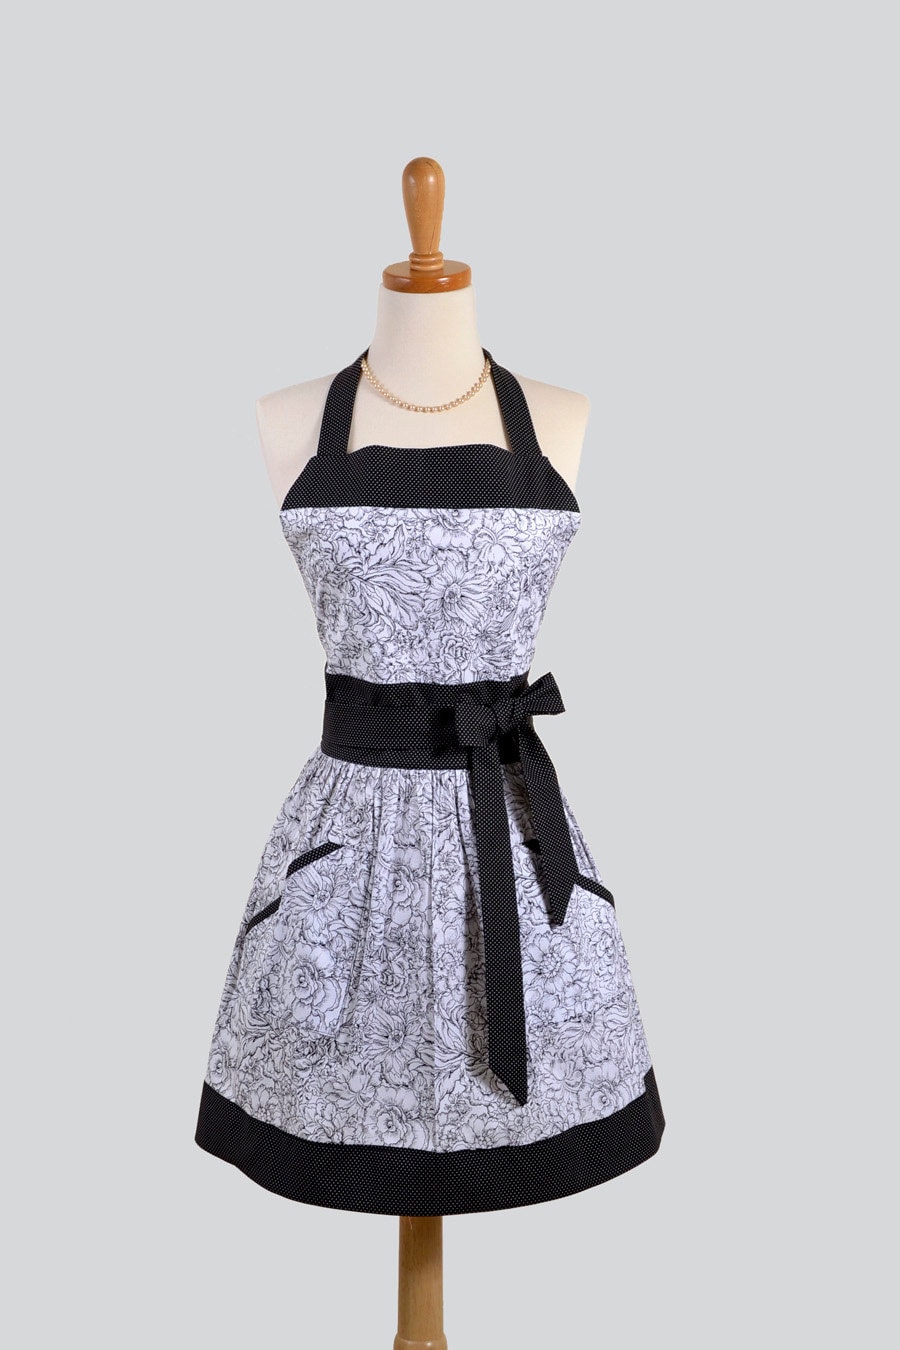 Womens Bib Apron A Sexy and Sophisticated Apron in Black and